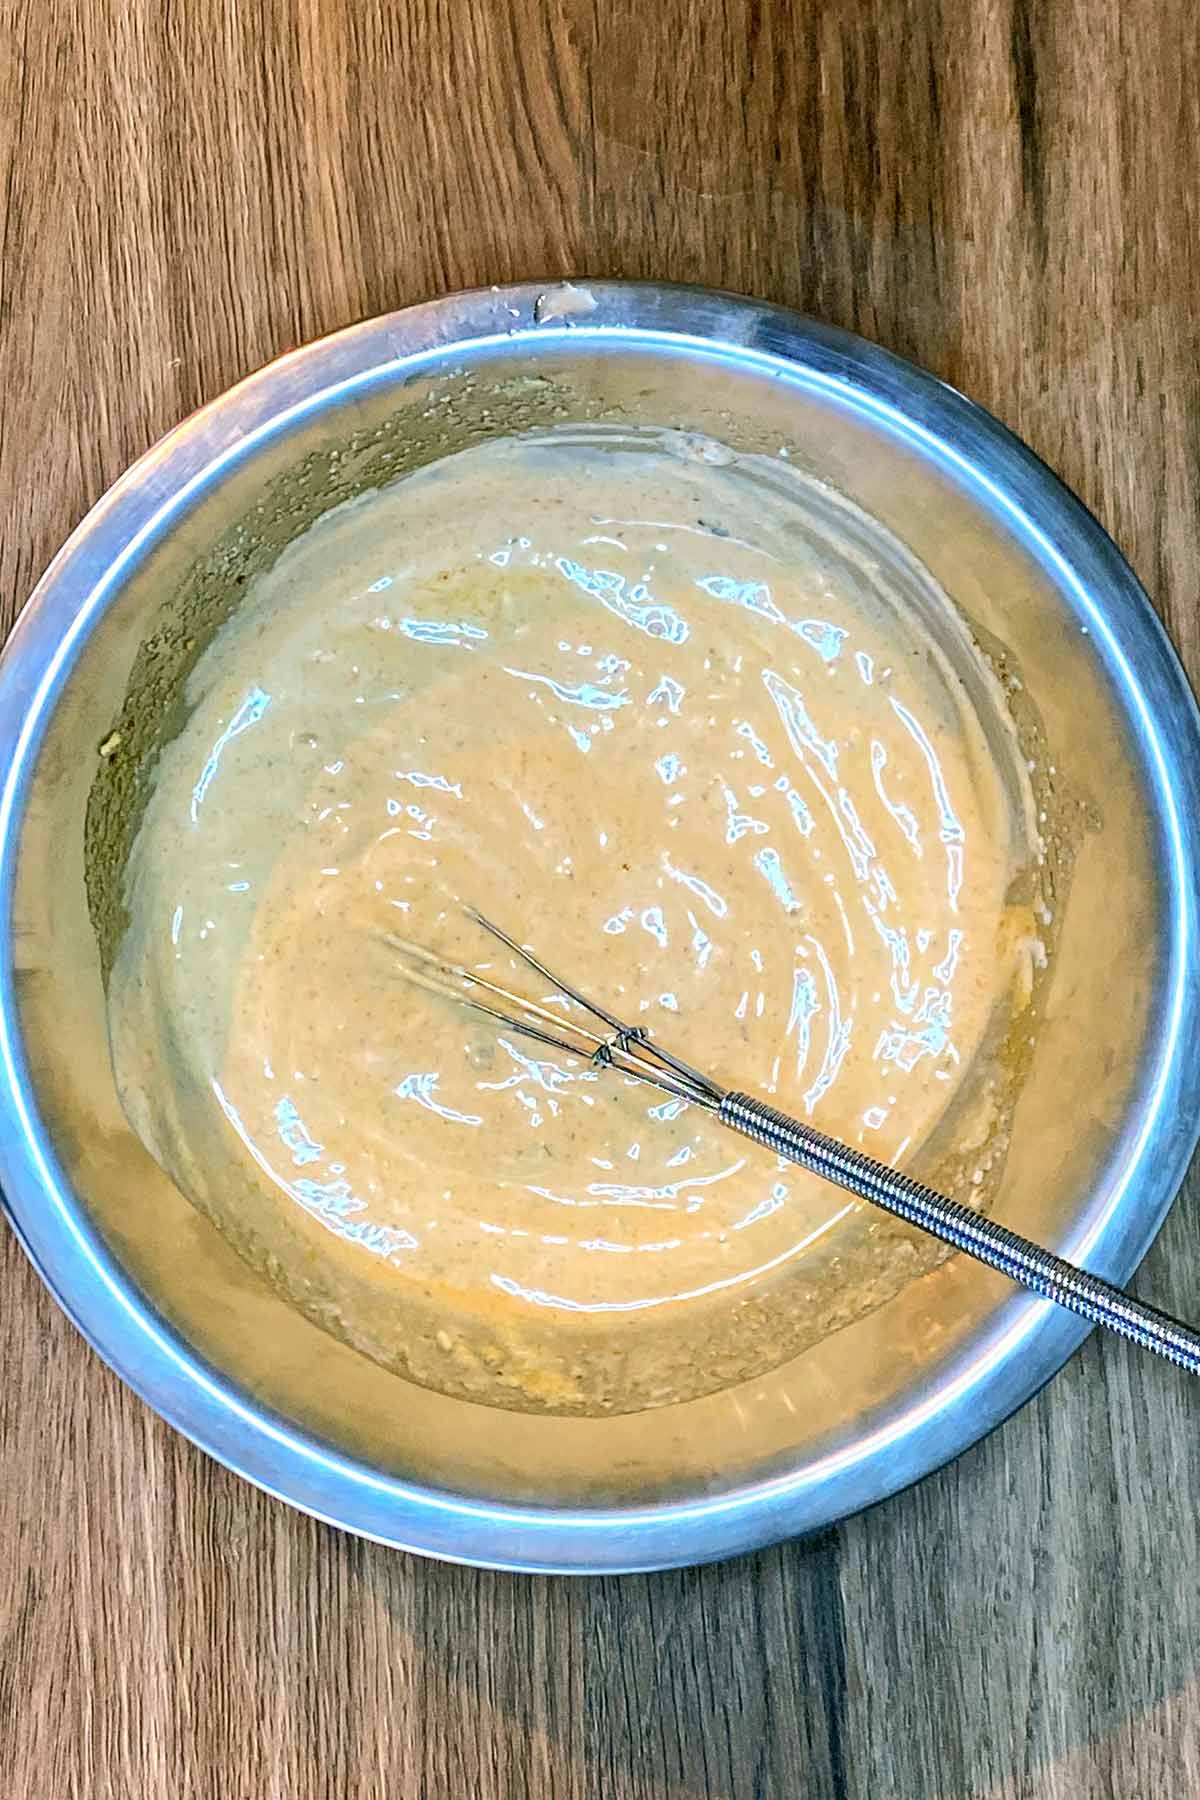 Everything mixed together in the bowl with a whisk.